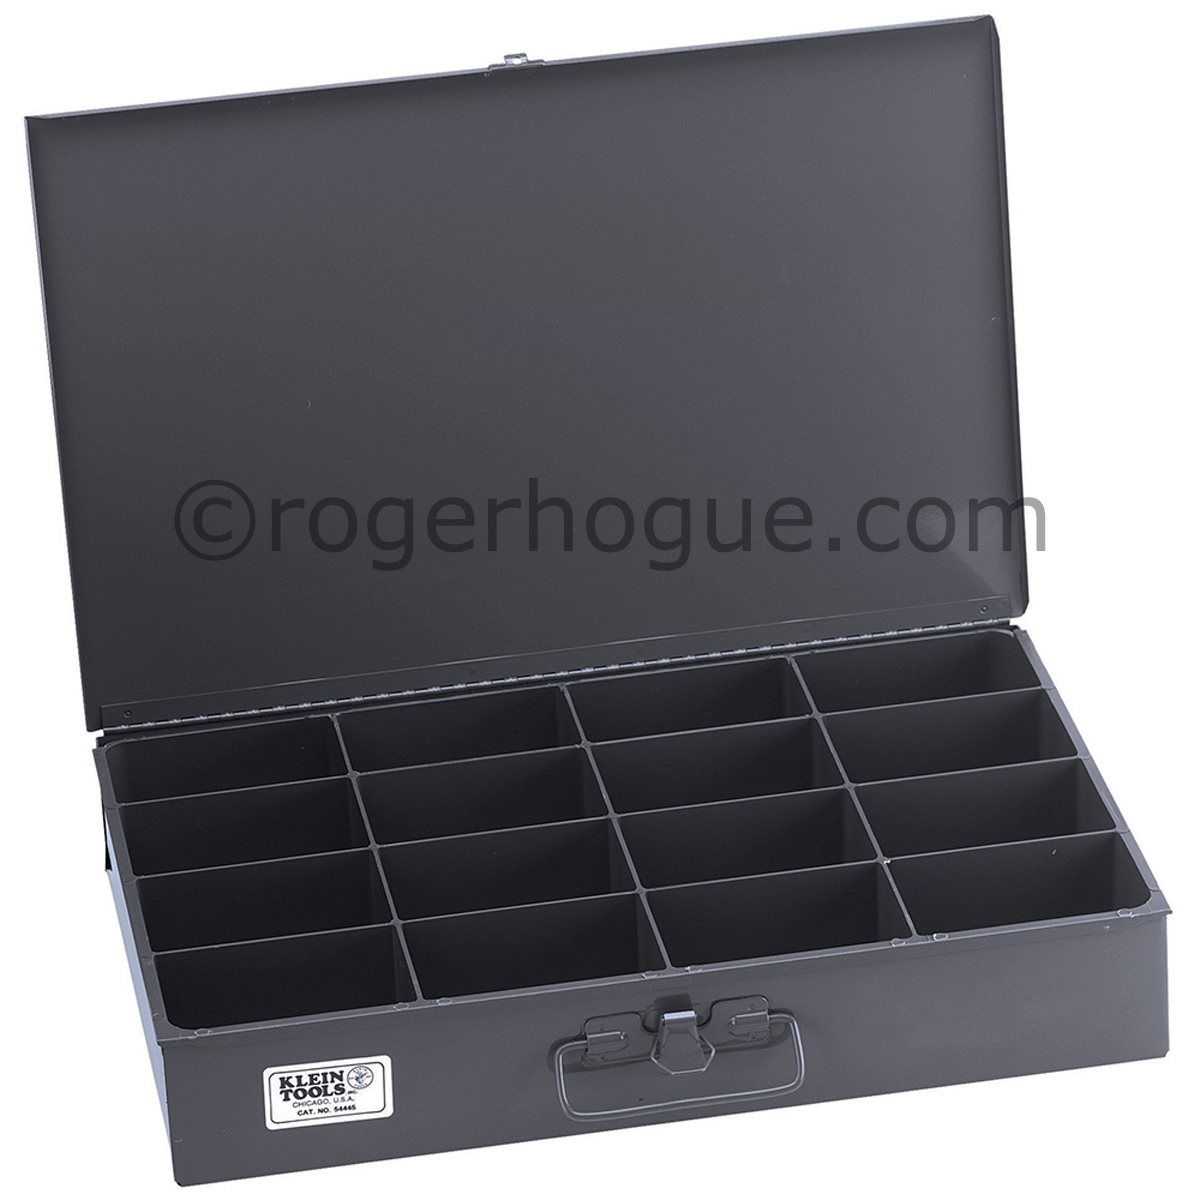 STORAGE BOX WITH 16 COMPARTMENTS